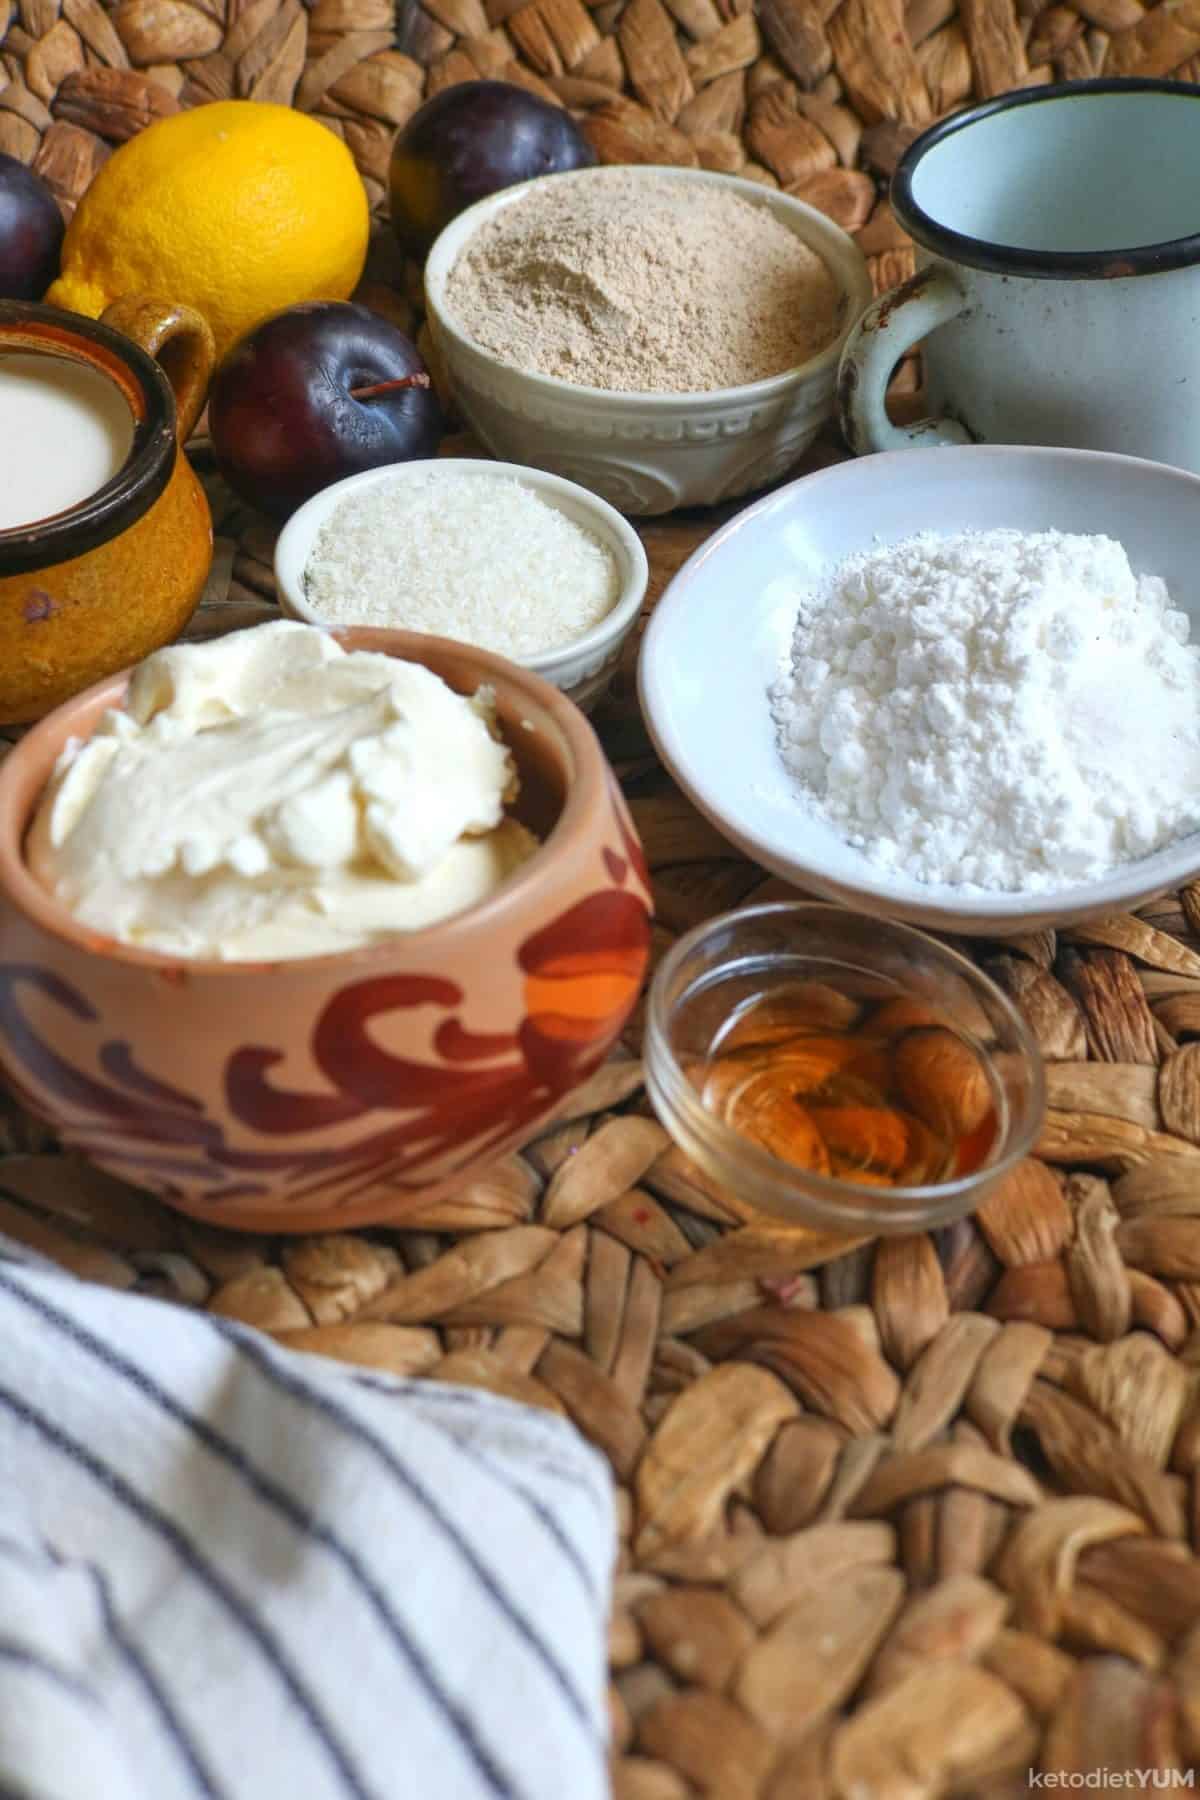 All the ingredients to make no bake keto cheesecakes